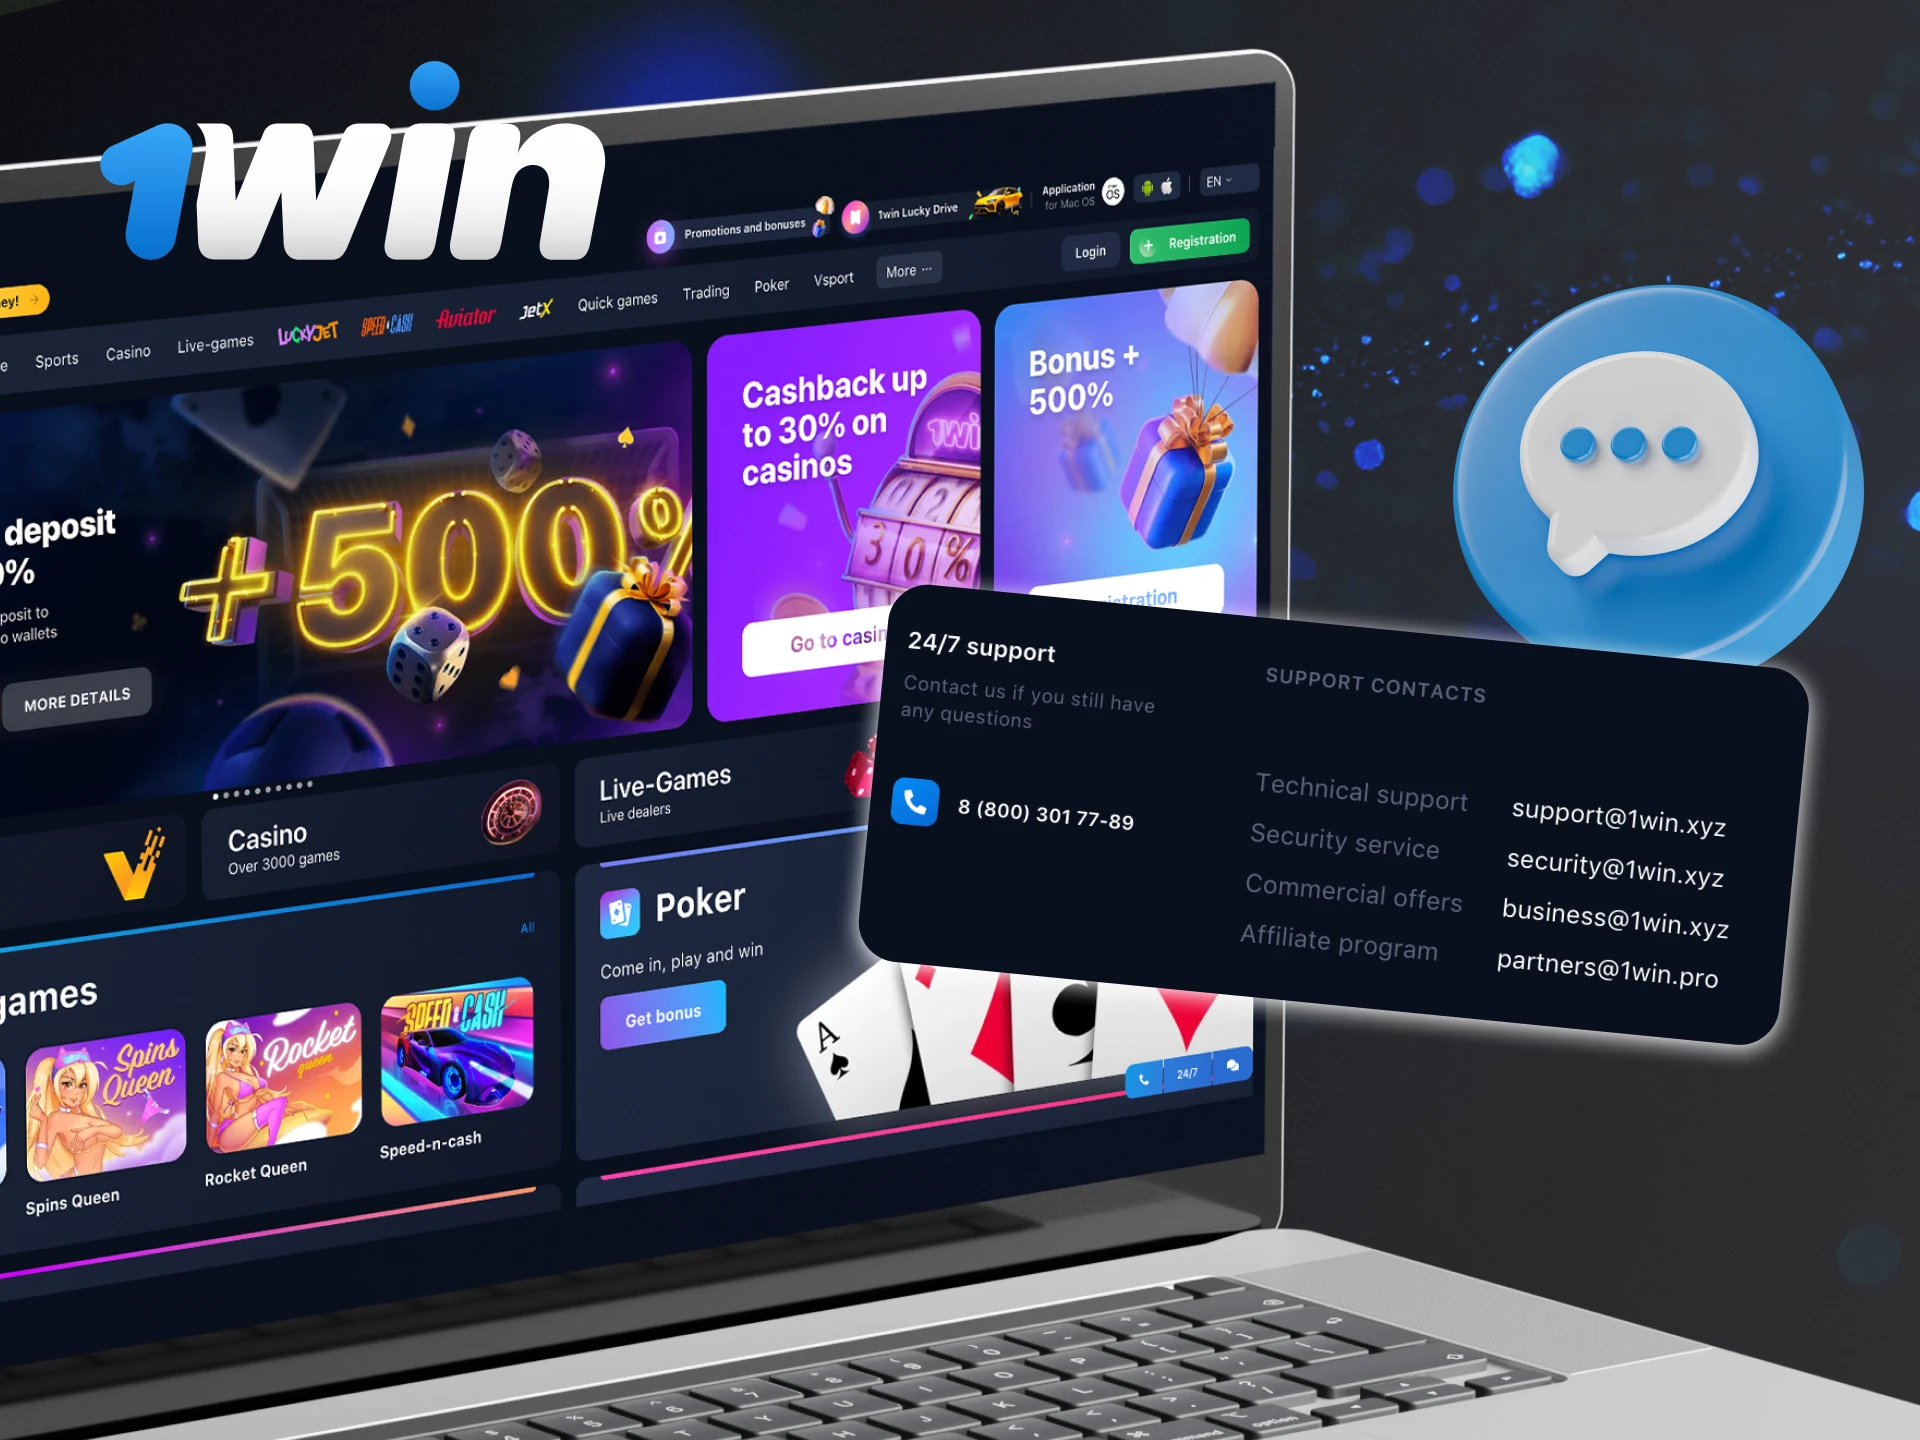 What is the name of the 1win casino support email.